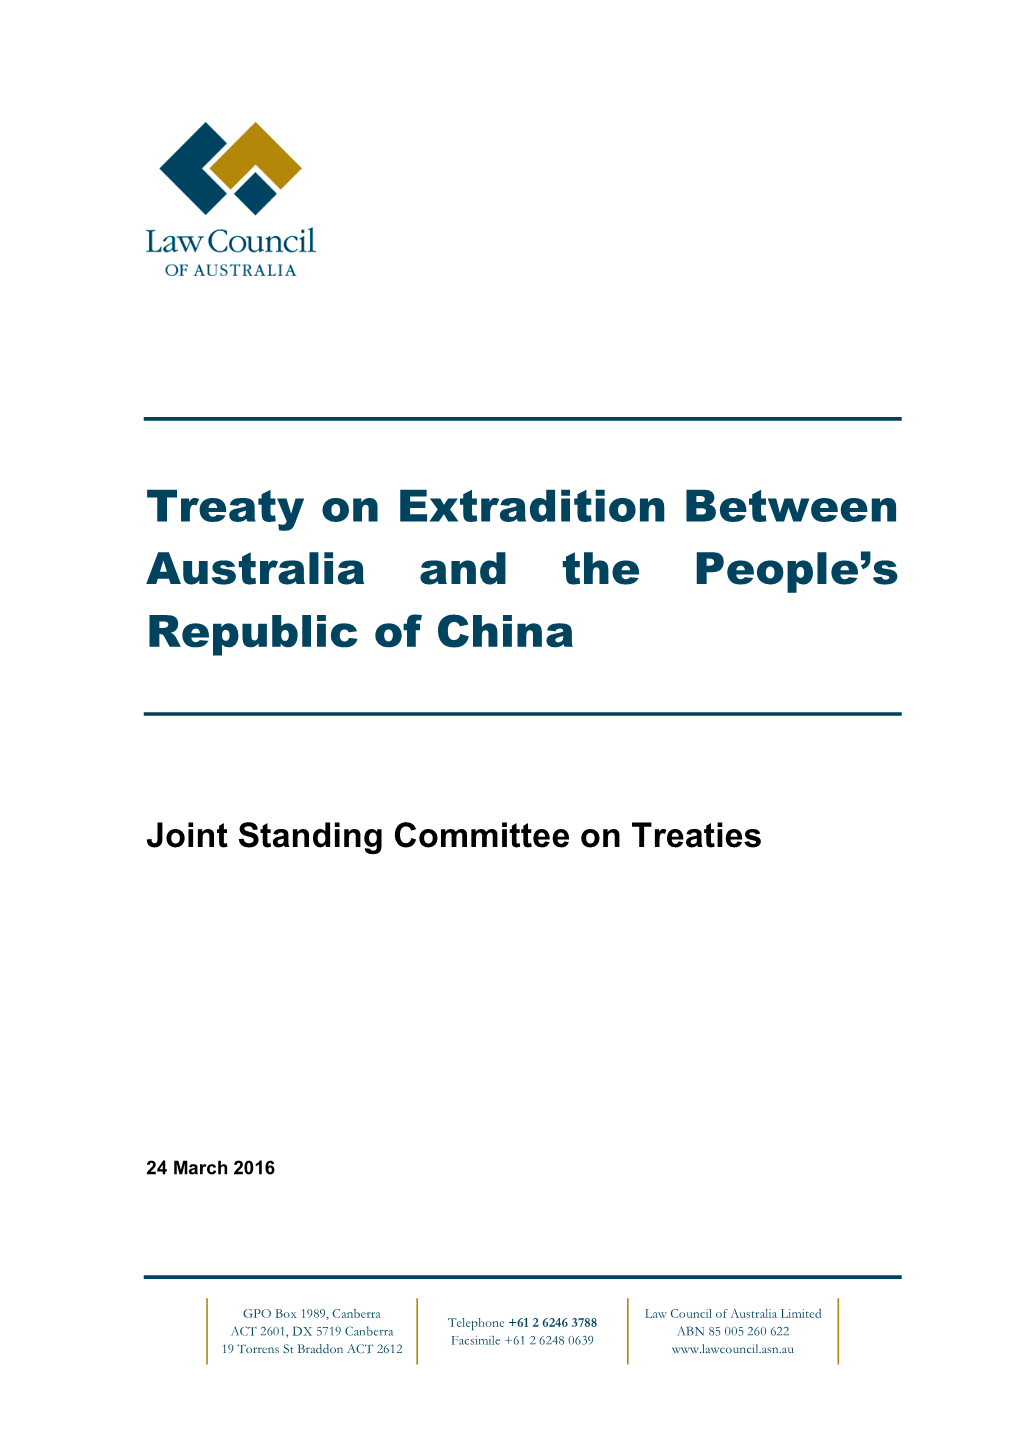 Treaty on Extradition Between Australia and the People's Republic